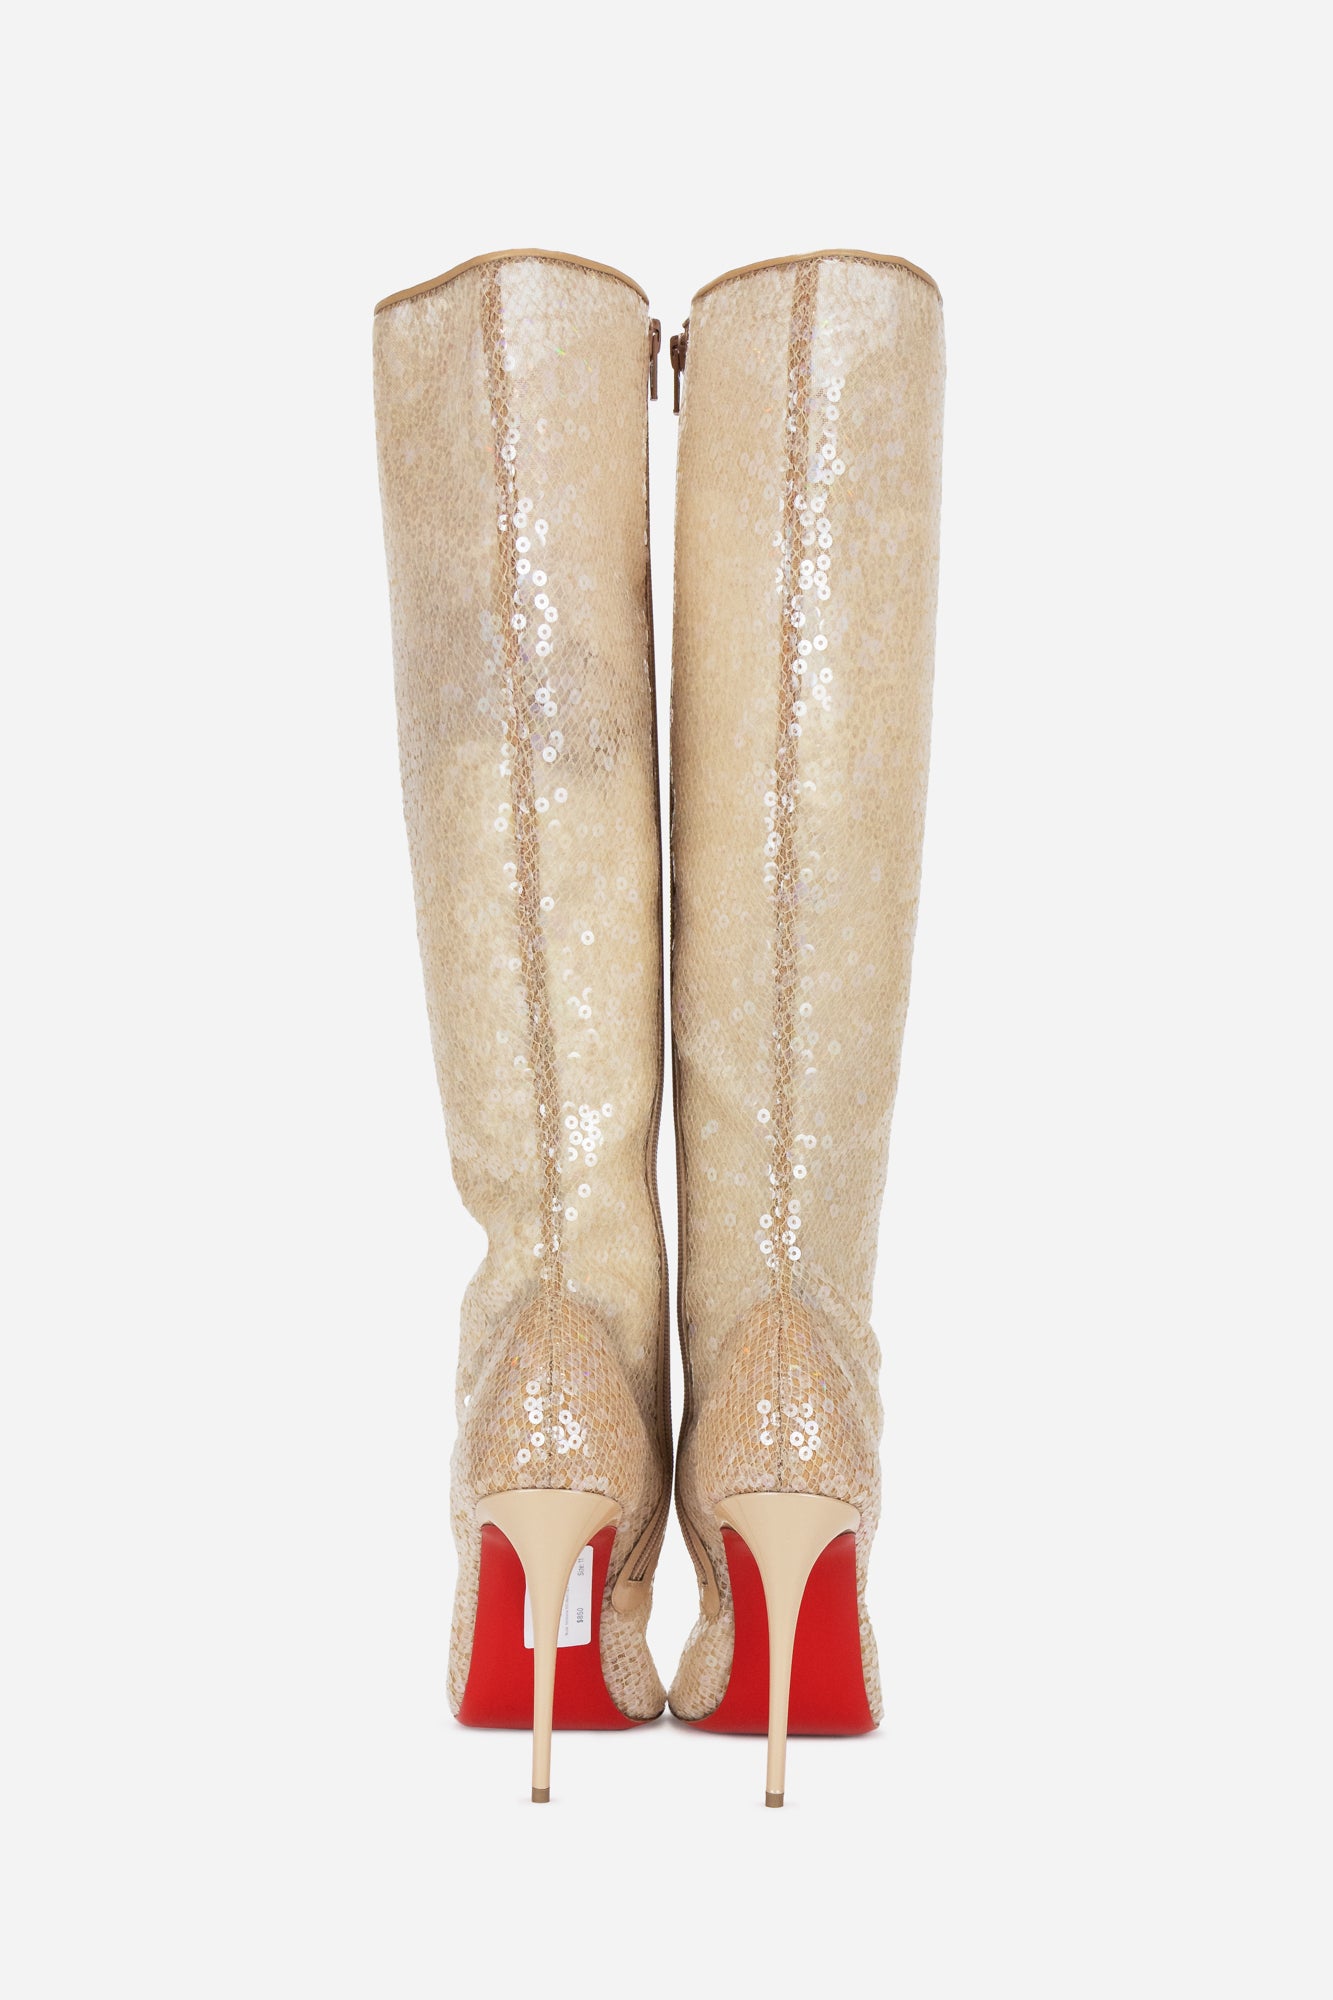 Nude Tenissina 100 Mesh Lace Sequin Knee High Boots